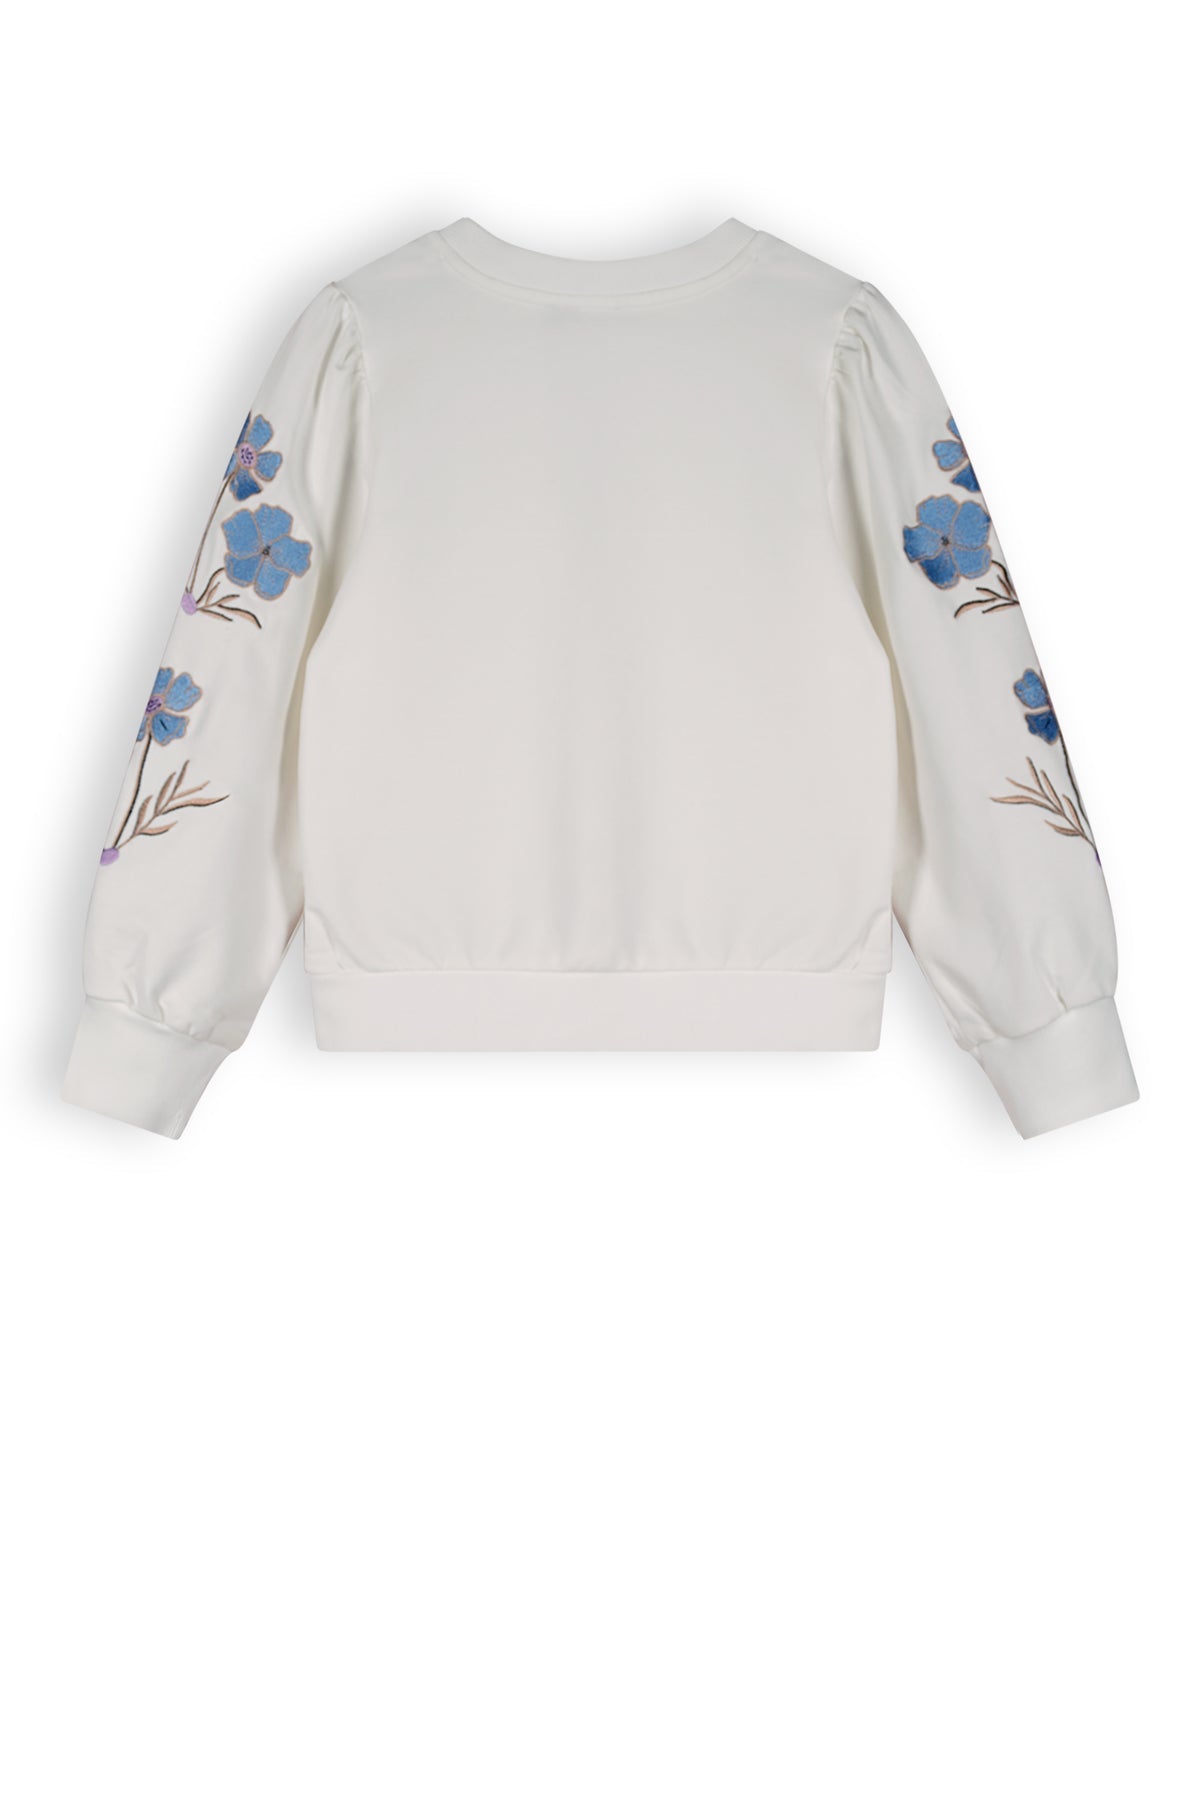 Meisjes Kate Girls Sweater Crew Neck With Embroidered Sleeves White van NoNo in de kleur Snow White in maat 134-140.